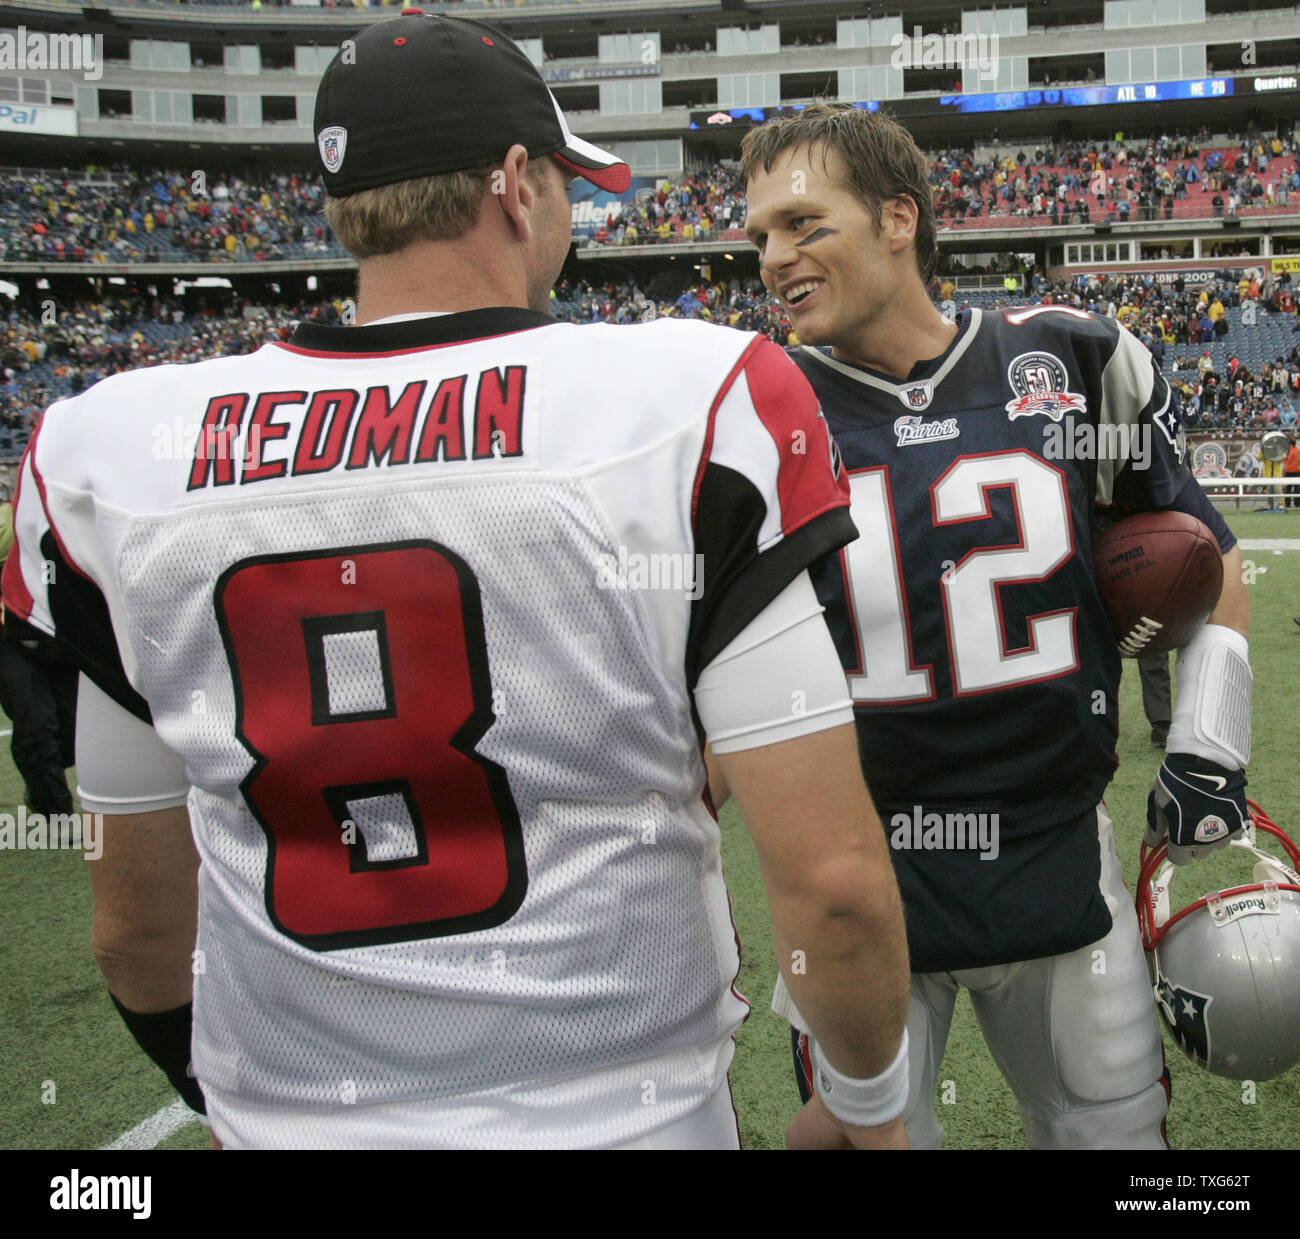 New England Patriots quarterback Tom Brady (12) shakes hands with Atlanta Falcons quarterback Chris Redman (8) after the Patriots defeated the Falcons 26-10 at Gillette Stadium in Foxboro, Massachusetts on September 27, 2009.   UPI/Matthew Healey Stock Photo